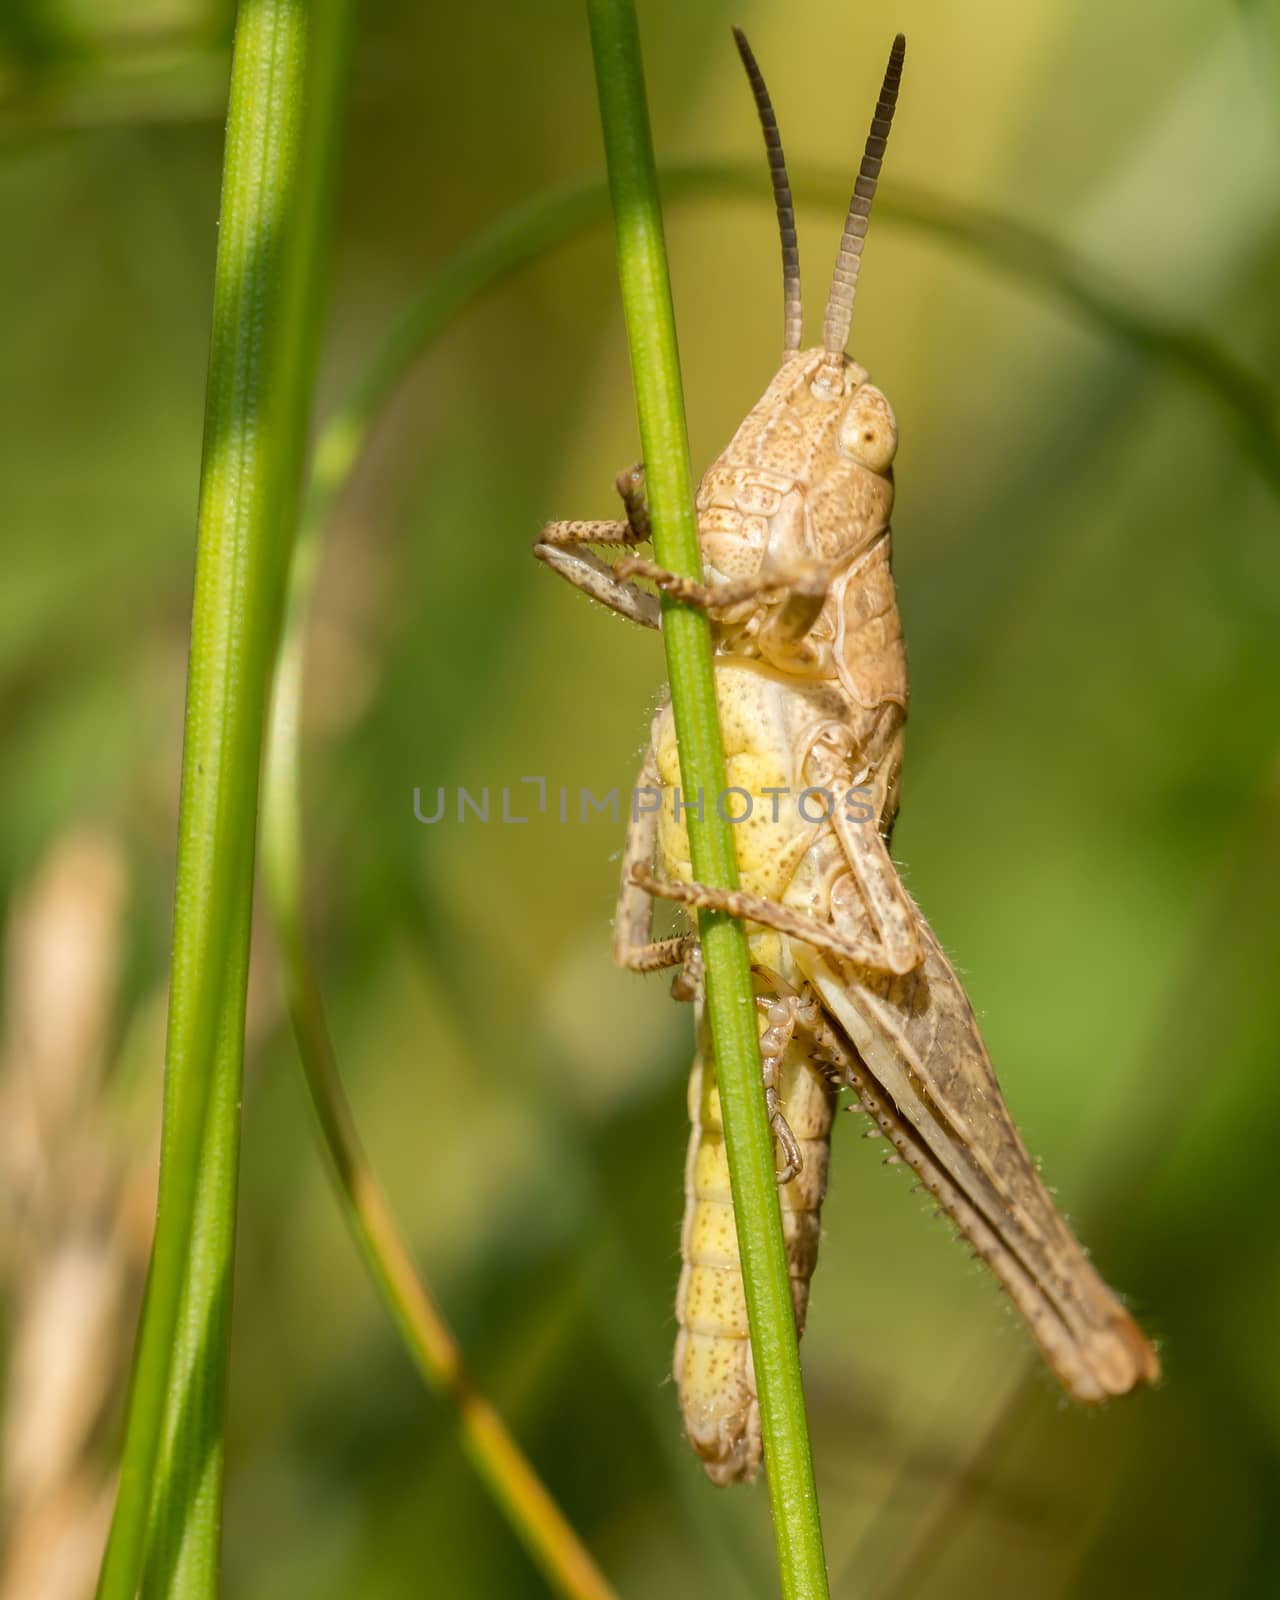 Light brown colored grasshopper resting on a blade of grass